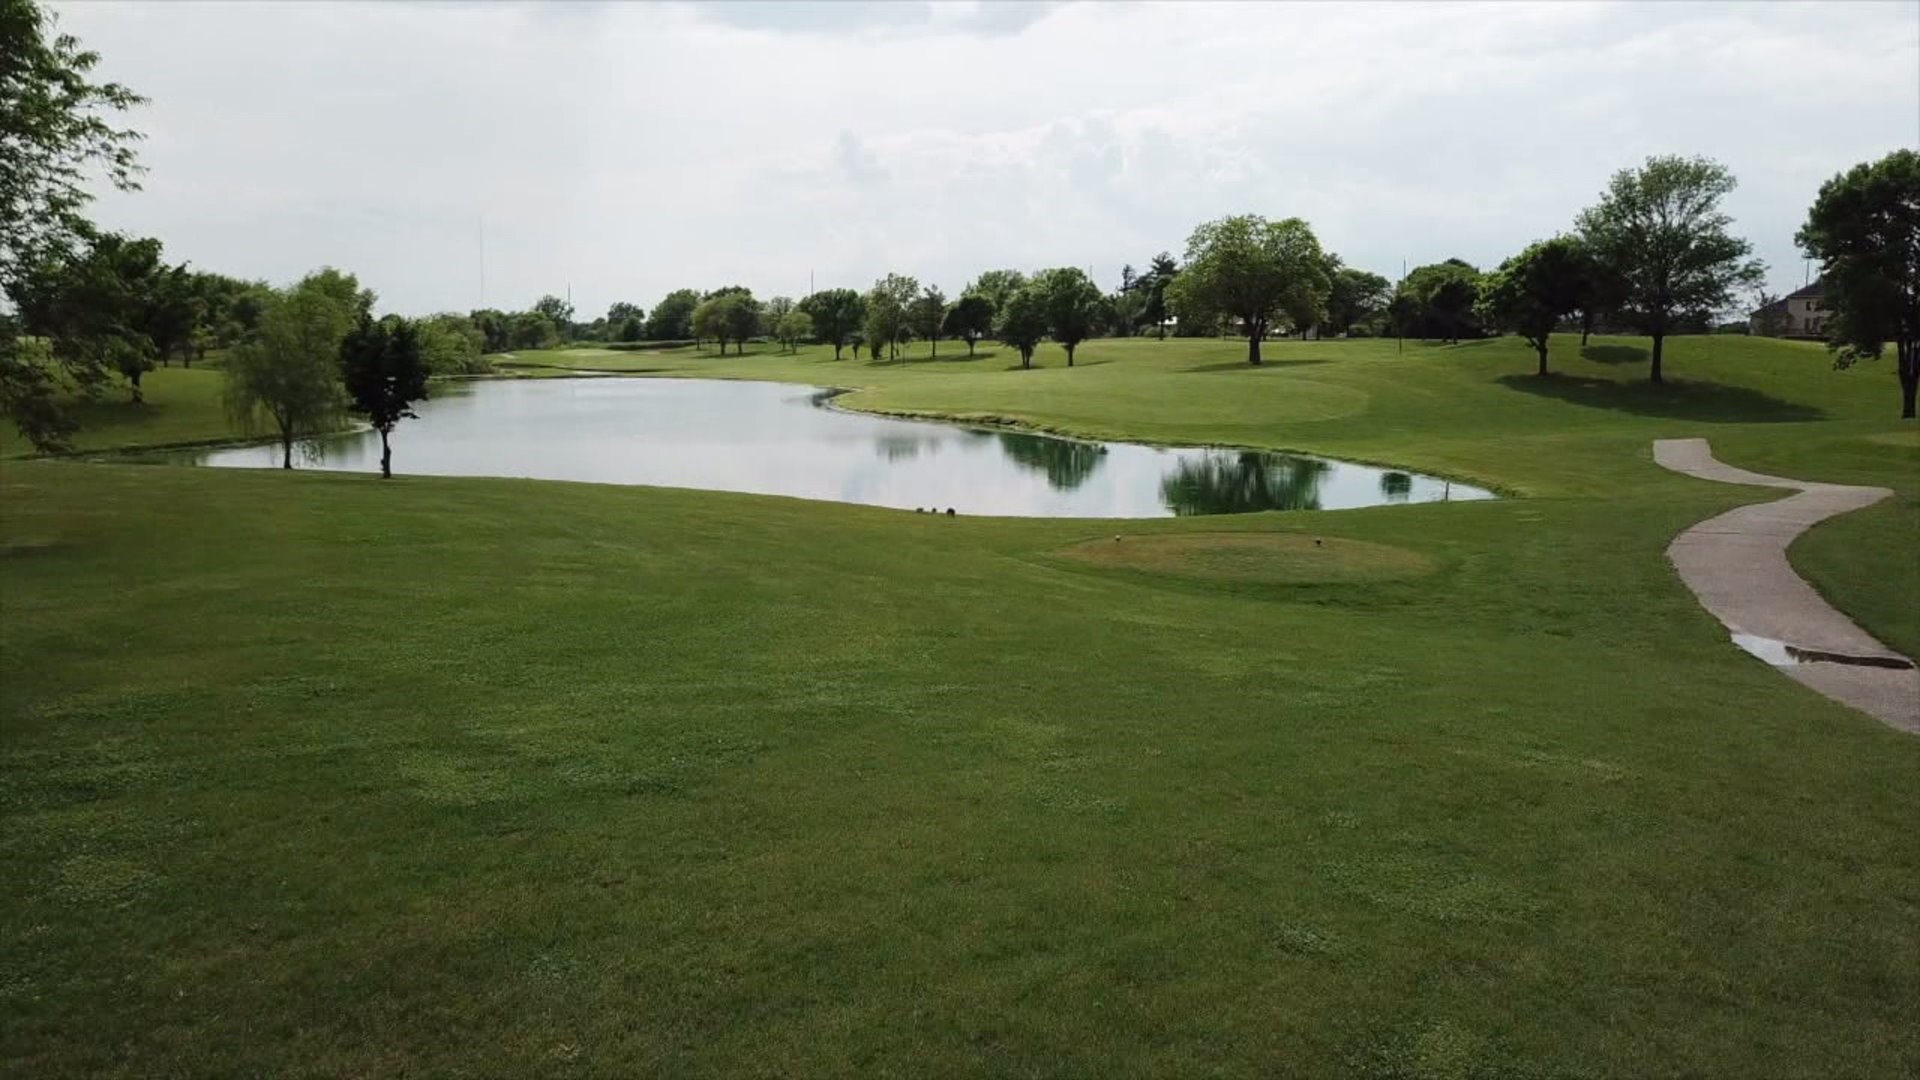 Golf Deals: Hawthorn Ridge Golf Club in Aledo is accessible and playable